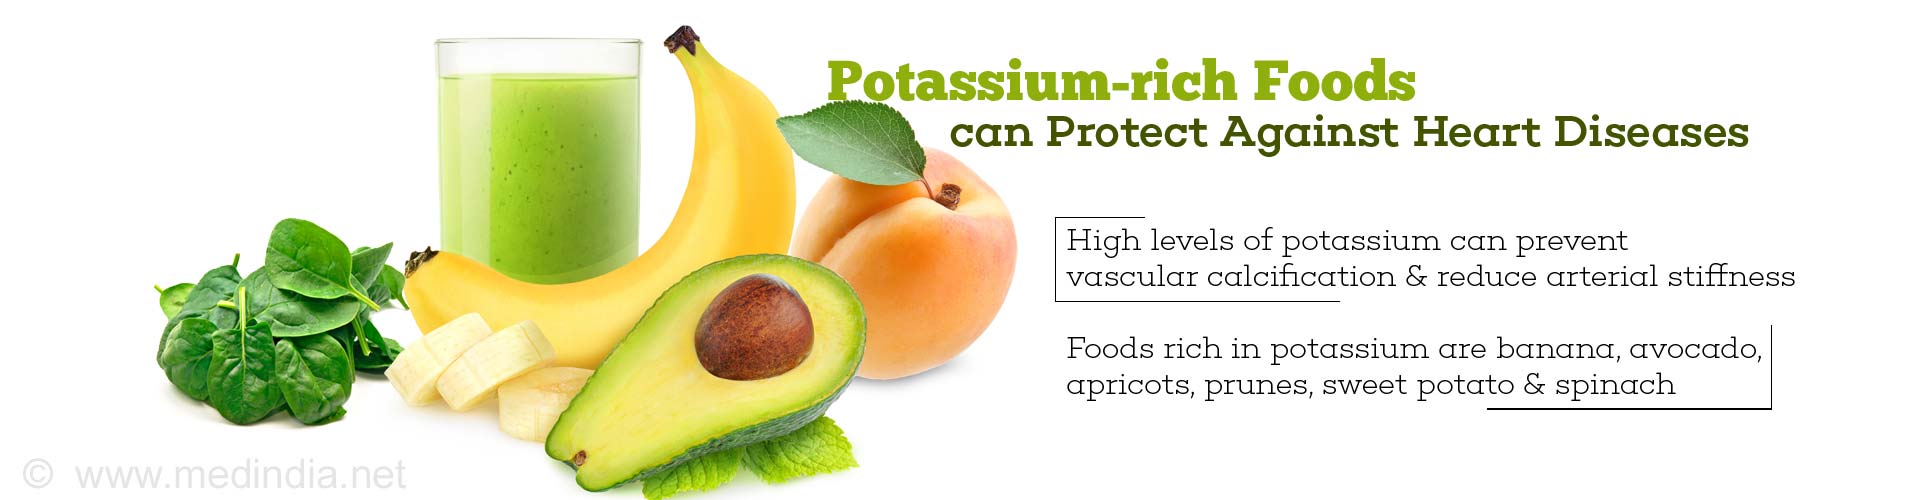 Potassium-rich Foods can Protect Against Heart Diseases
- High levels of potassium can prevent vascular calcification & reduce arterial stiffness
- Foods rich in potassium are banana, avocado, apricots, prunes, sweet potato & spinach